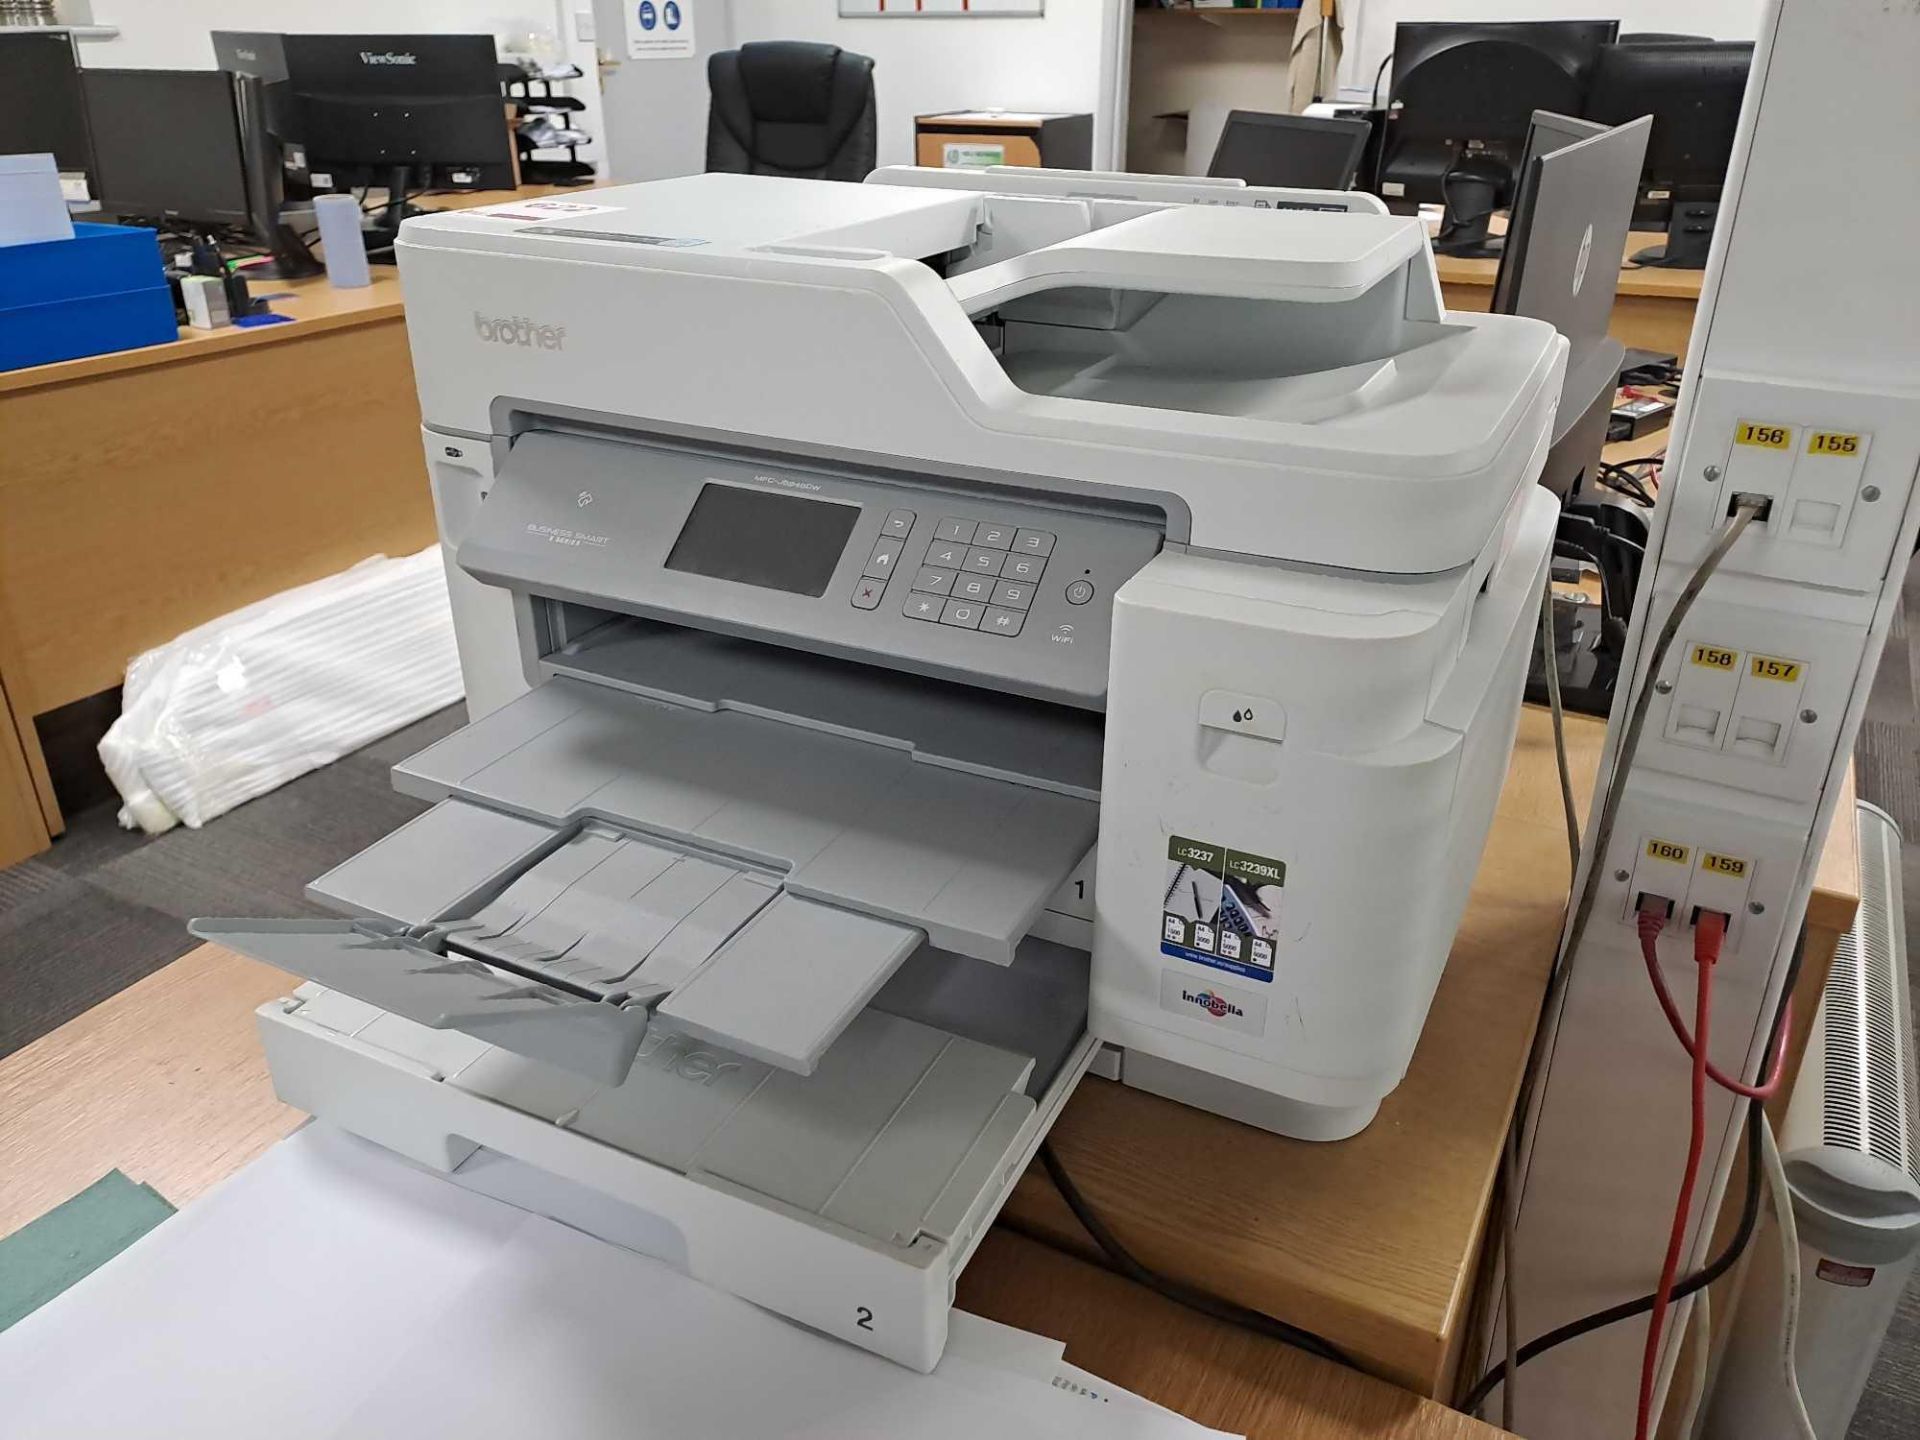 Brother X Series printer, model MFC-J5945DW - Image 2 of 4